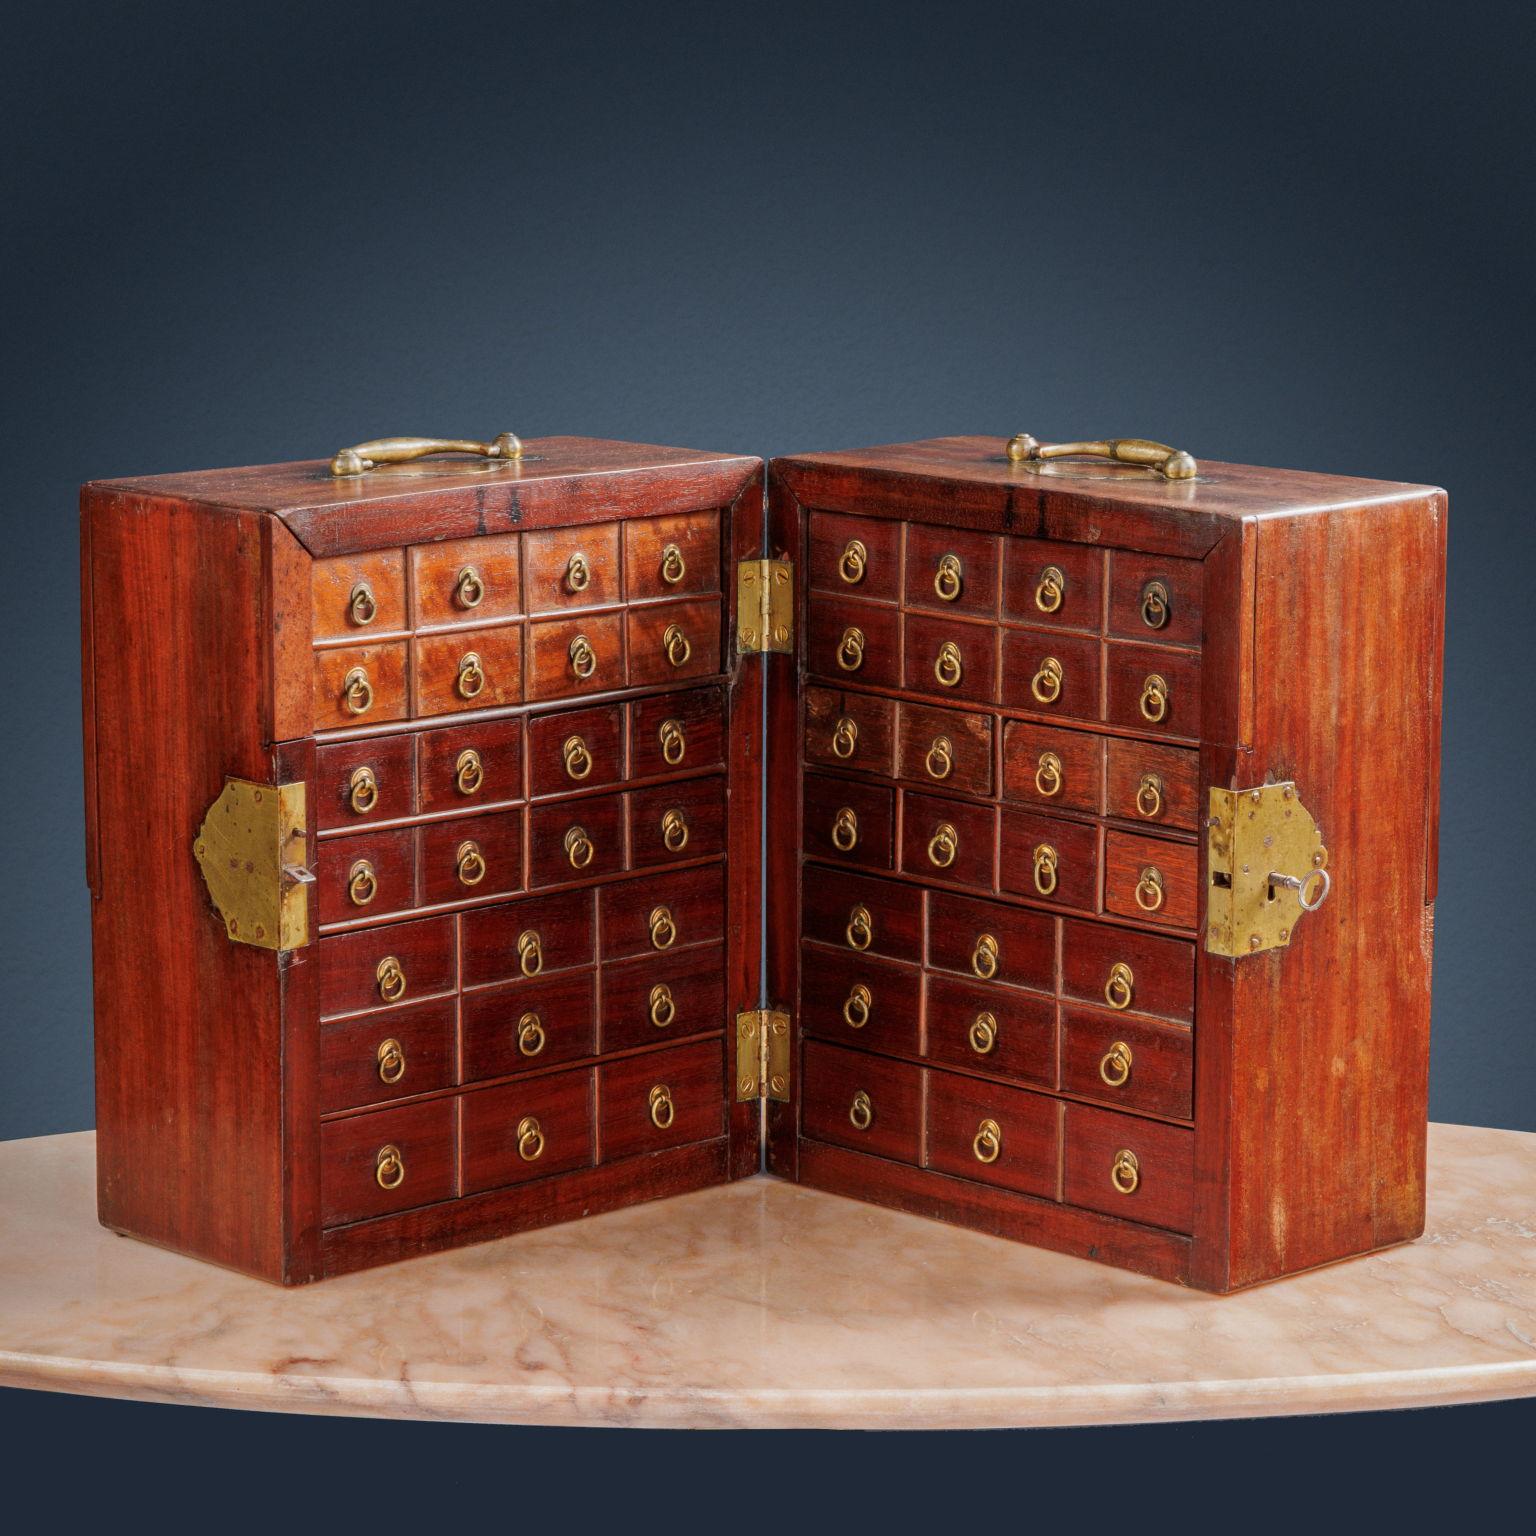 Spice box, commonly called “travel pharmacy”. Divided specularly in half, the piece of furniture closes with a central lock which also blocks the two side tables which conceal the glass bottles. Inside, the space is divided into small drawers, some,